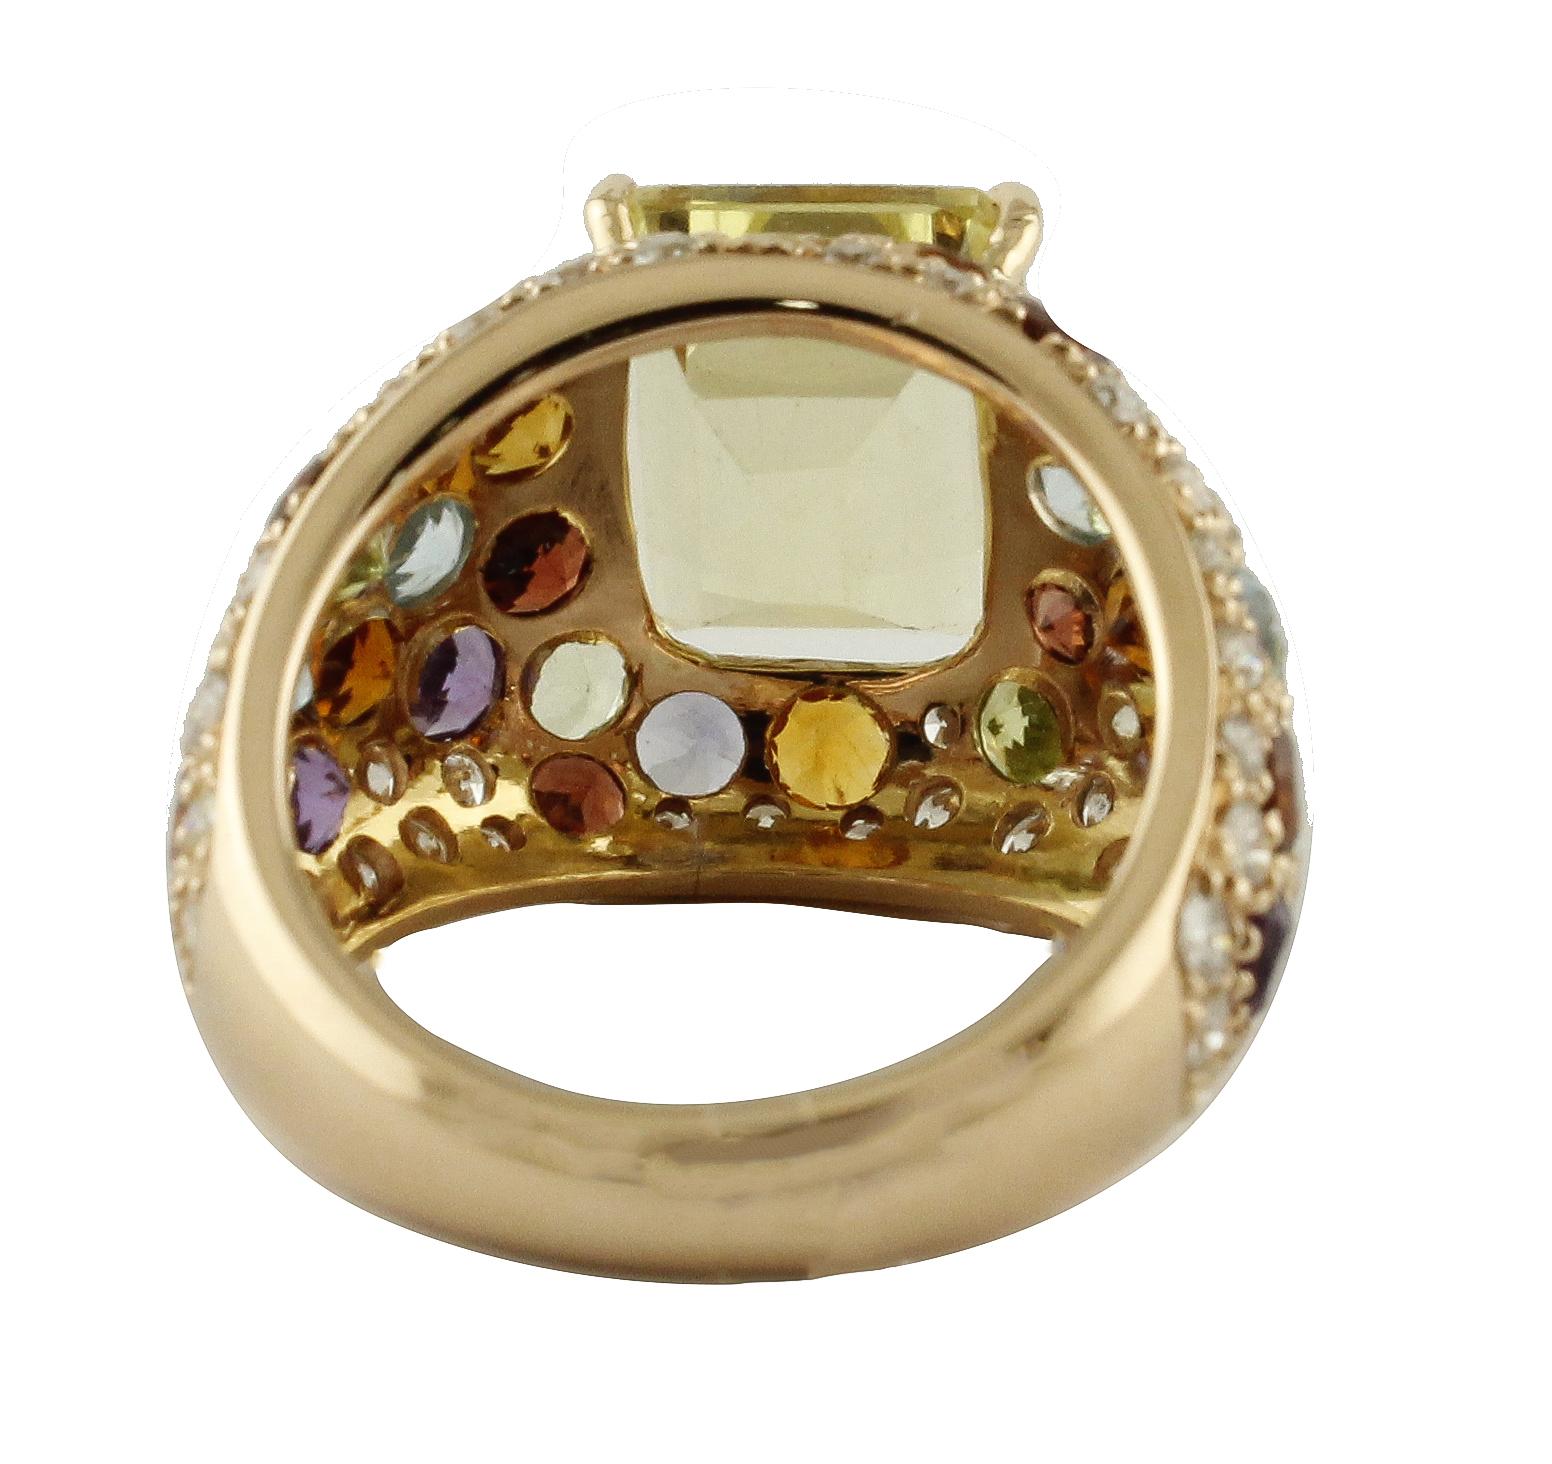 Amazing fashion ring in 14K rose gold mounted with fabulous central yellow topaz studded by diamonds,  amethysts,  iolite, peridots, garnets and other topaz.
Diamonds 1.67 ct
Topaz, Garnets, Peridots,Iolite Amethysts 11.36 ct
Total Weight 8.80 g
R.F